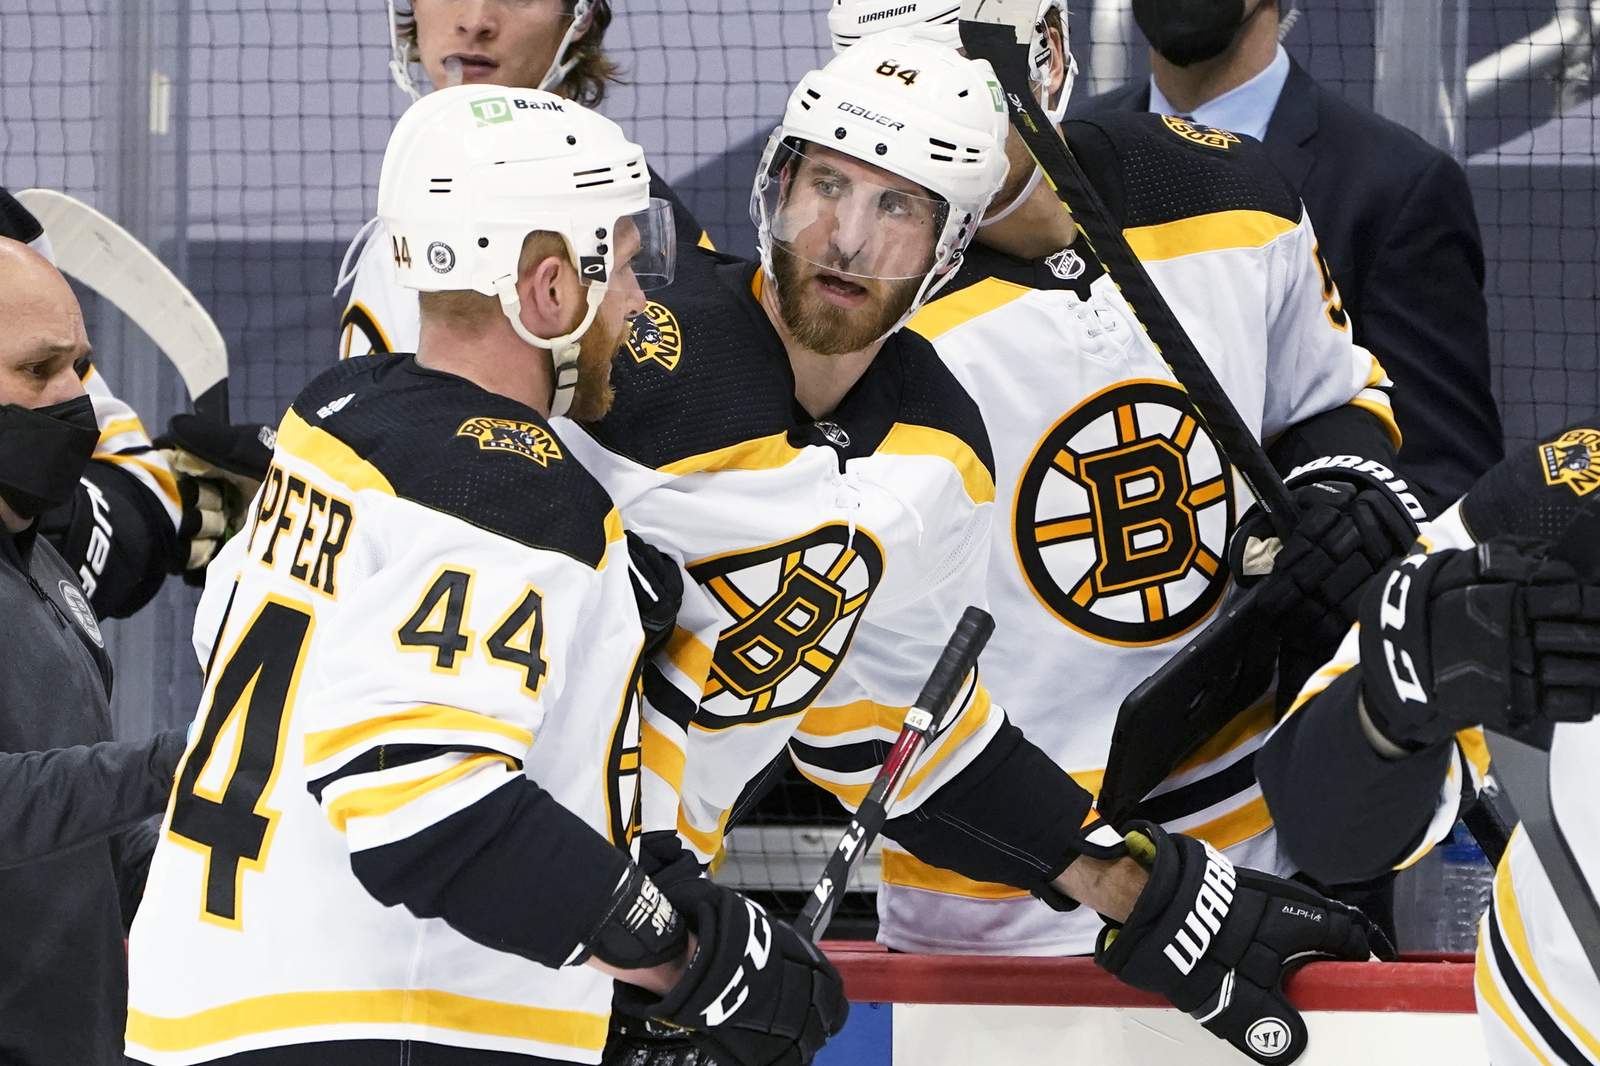 The Latest: NHL's Bruins resume practice, scheduled to play